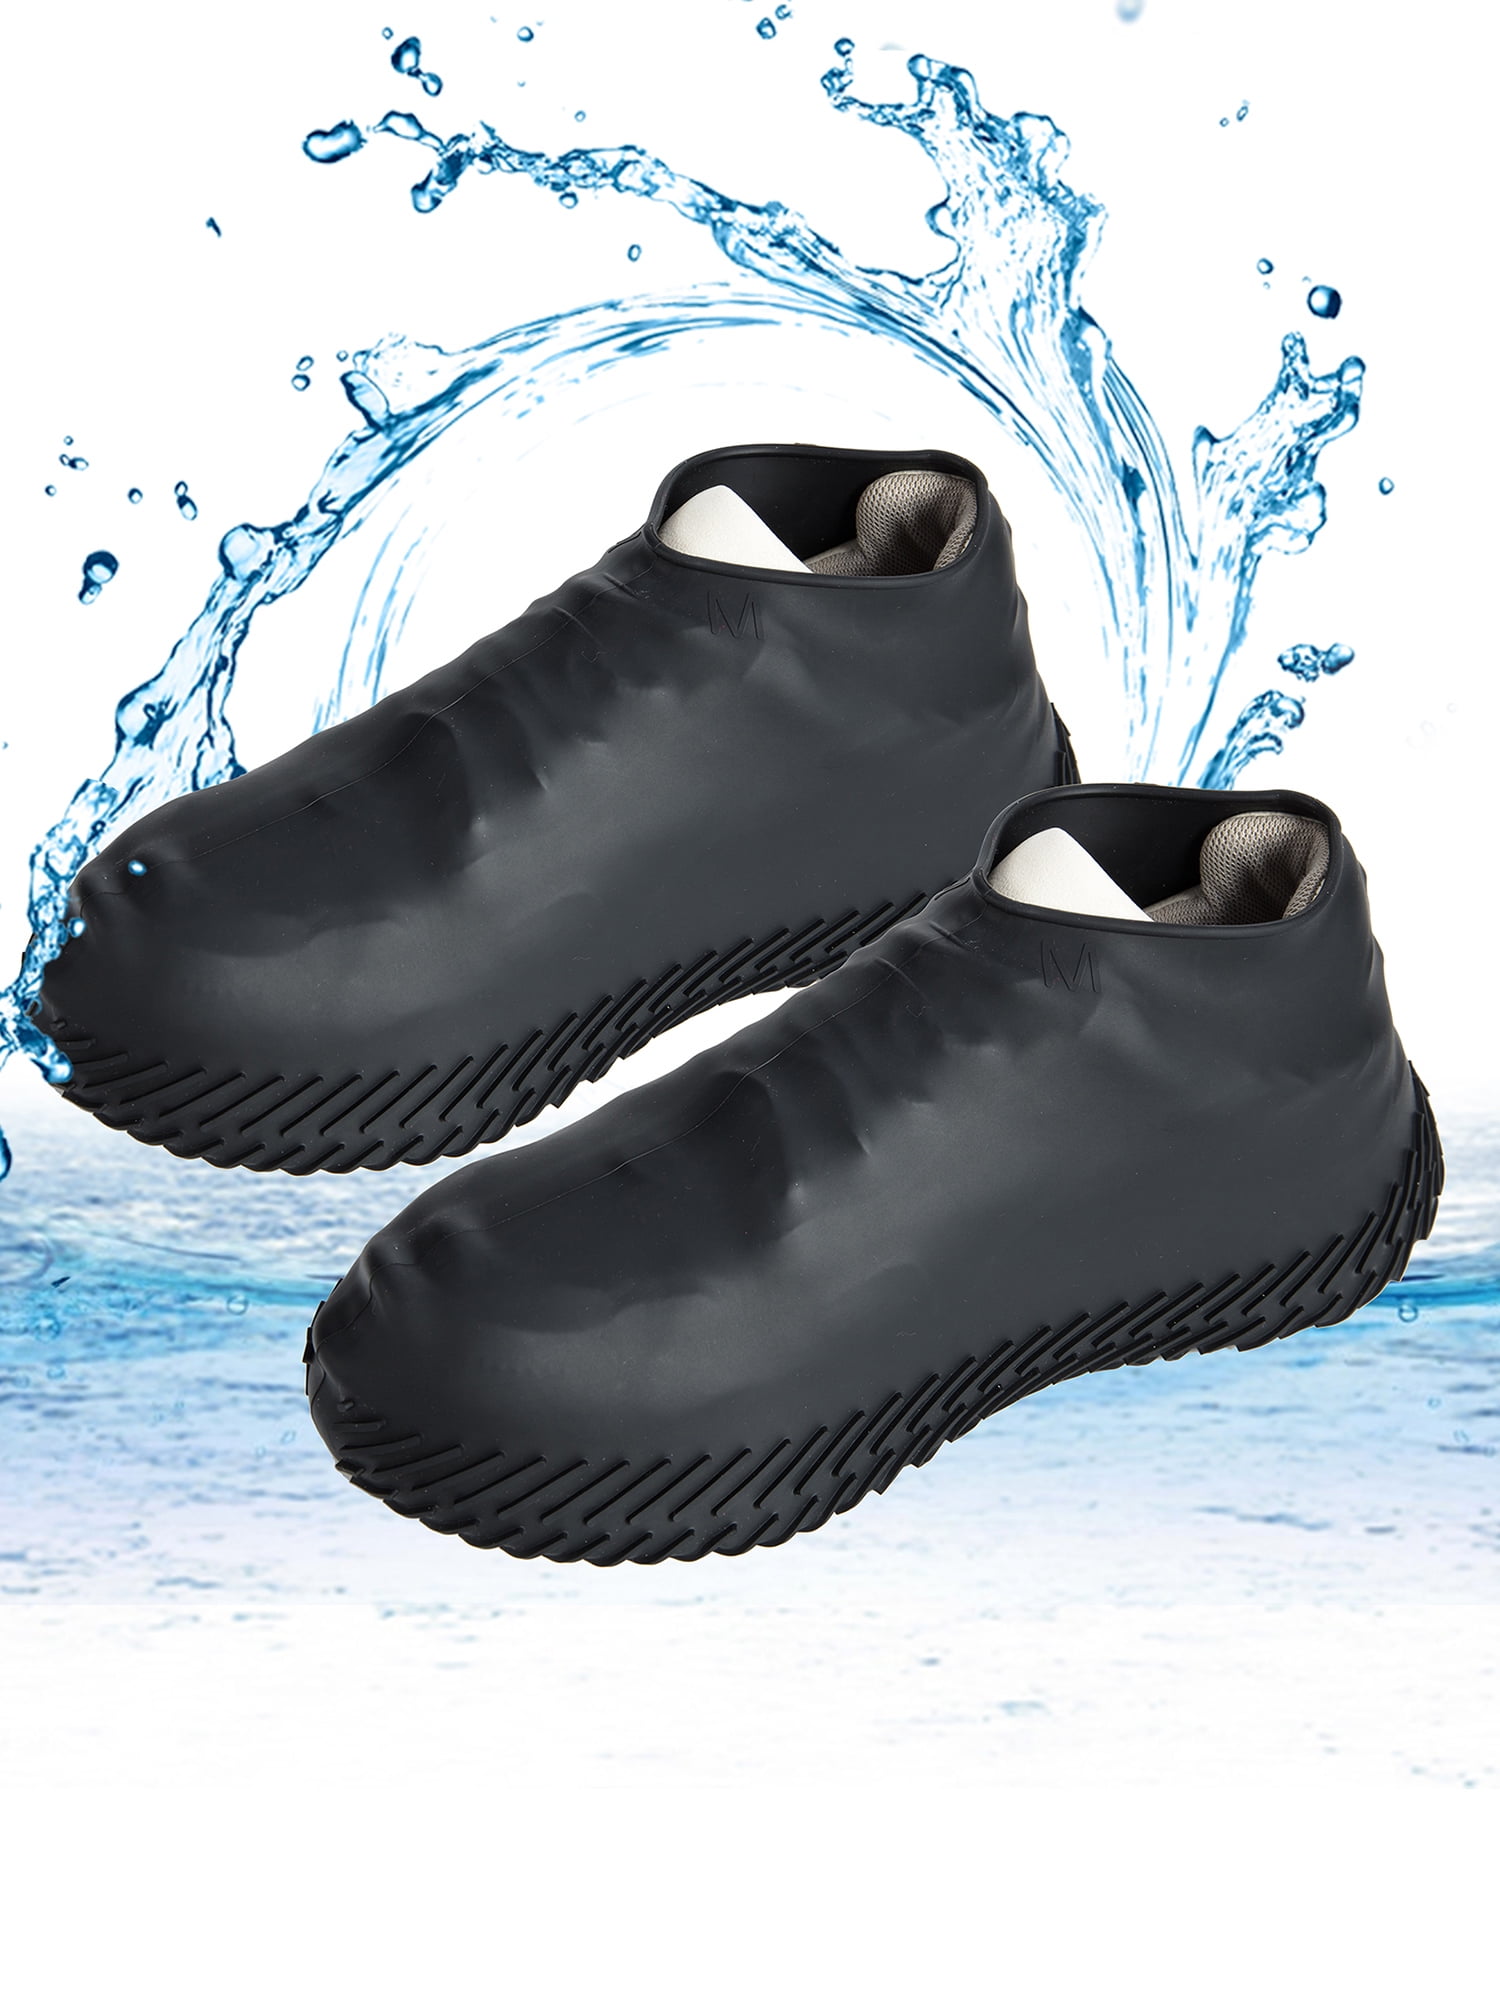 Reusable Silicone Overshoes Rain Waterproof Shoe Covers Boot Protector Cover 